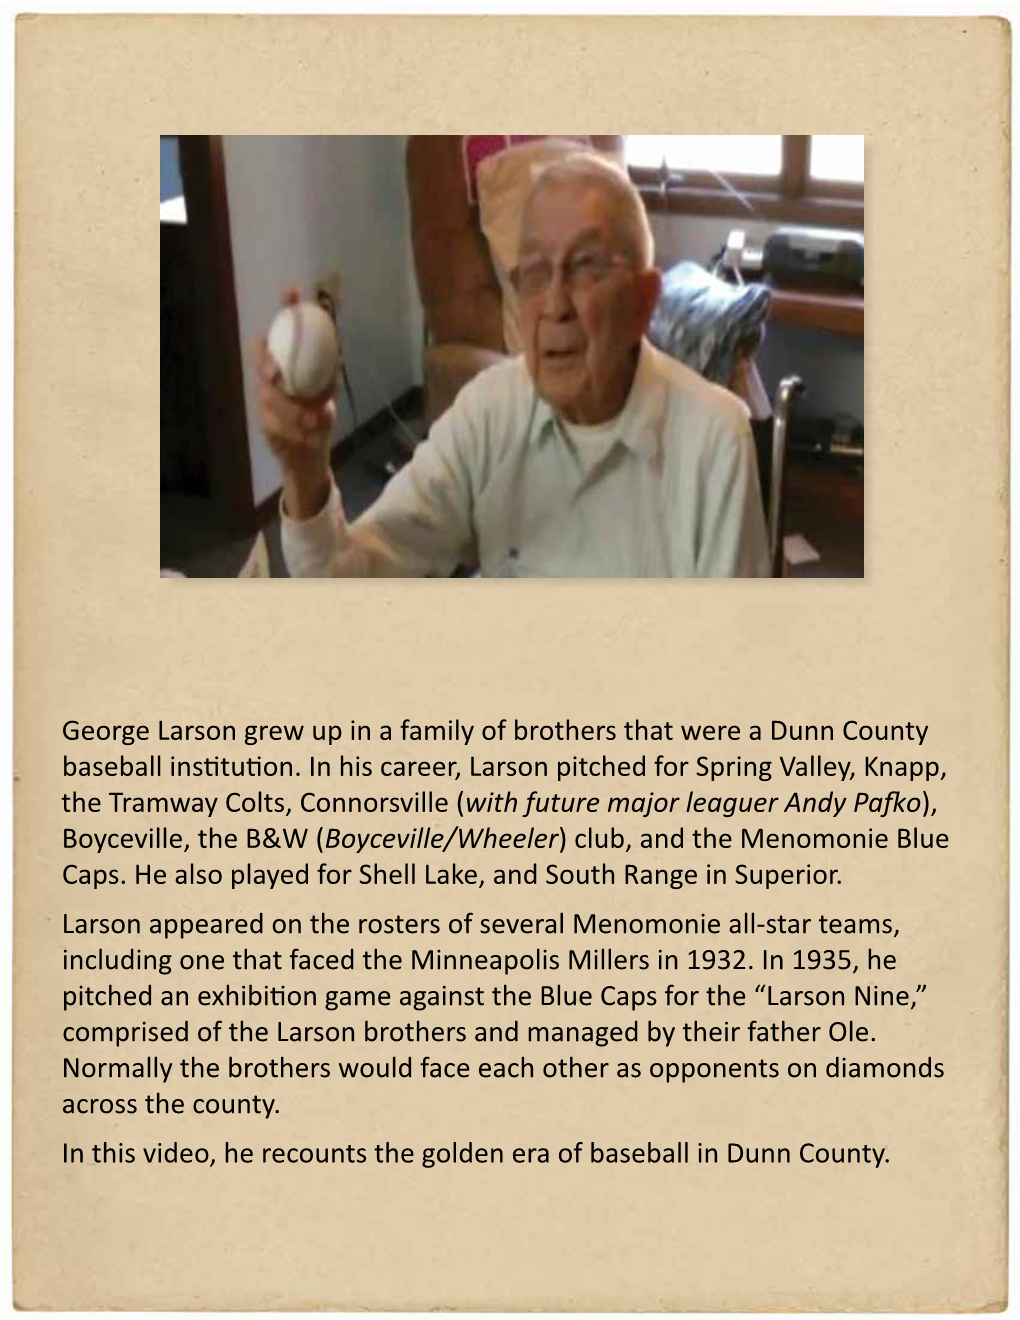 George Larson Grew up in a Family of Brothers That Were a Dunn County Baseball Institution